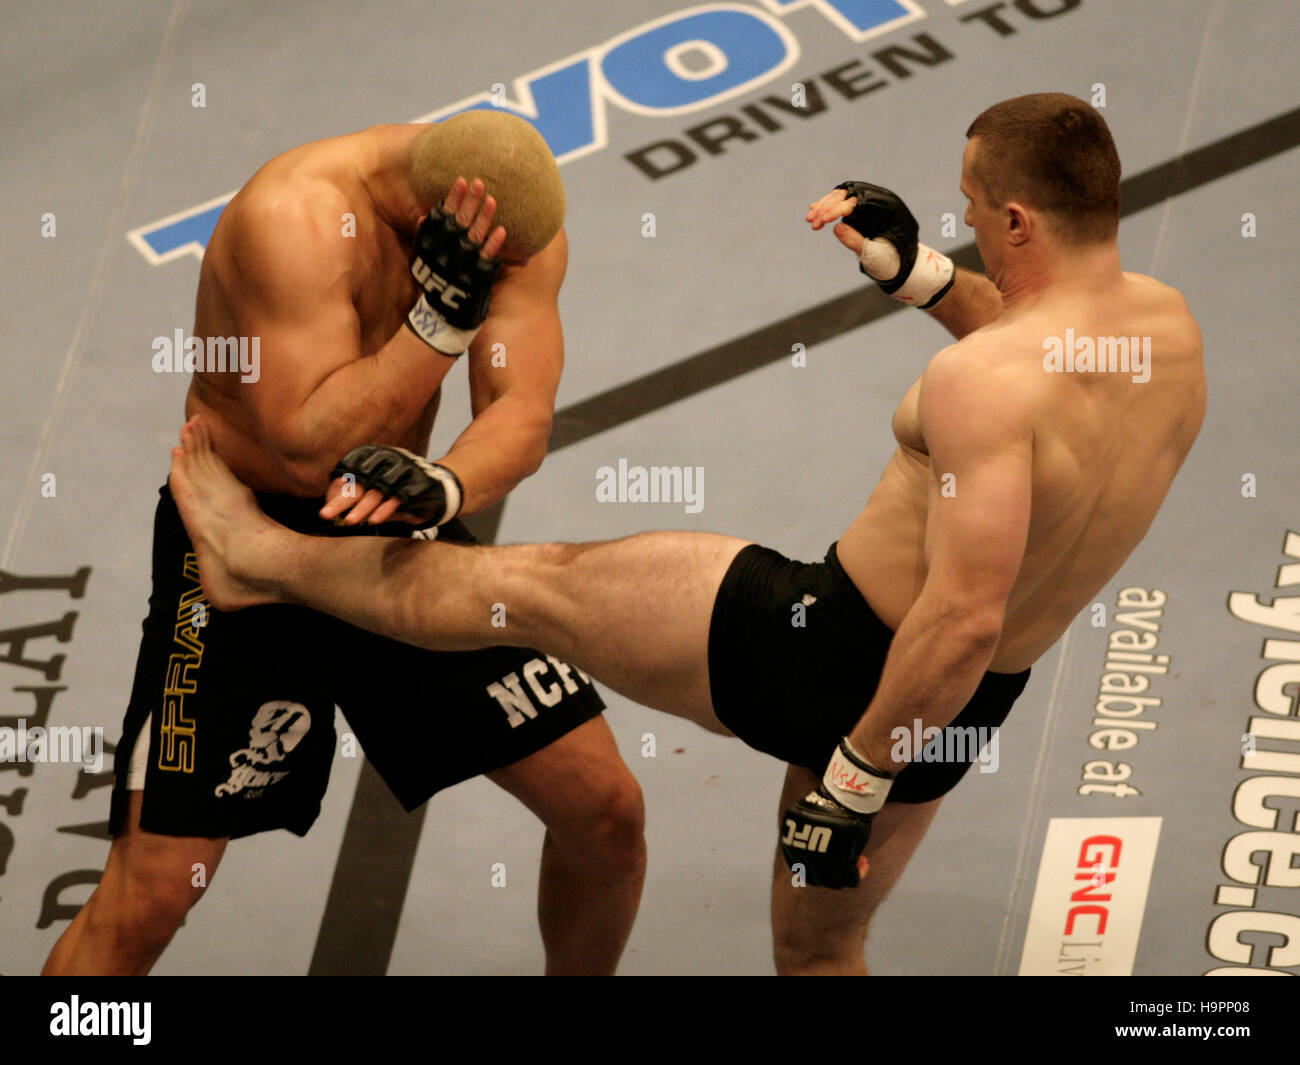 Mirko Cro Cop, right, fights Eddie Sanchez at the Ultimate Fighting Champion Championship UFC 67 at the Mandalay Bay Hotel in Las Vegas on Feb. 3, 2007. Photo credit: Francis Specker Stock Photo